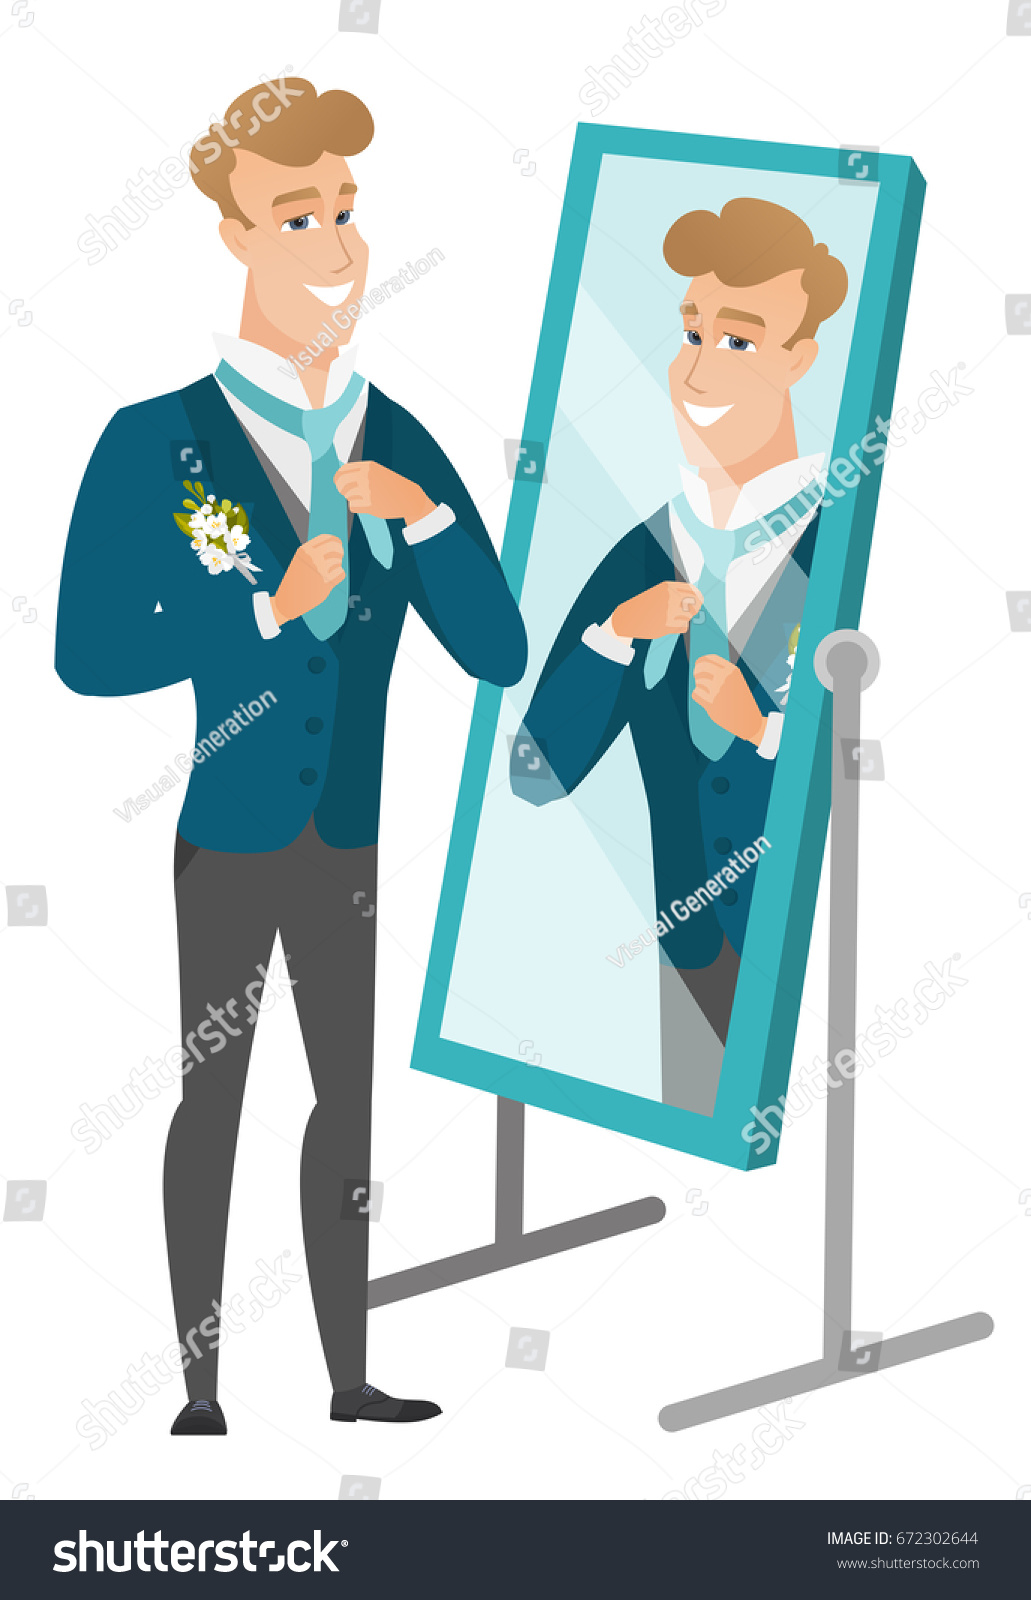 SVG of Cheerful caucasian groom has a final preparation before the wedding in front of the mirror. Groom looking in the mirror and adjusting tie. Vector flat design illustration isolated on white background. svg